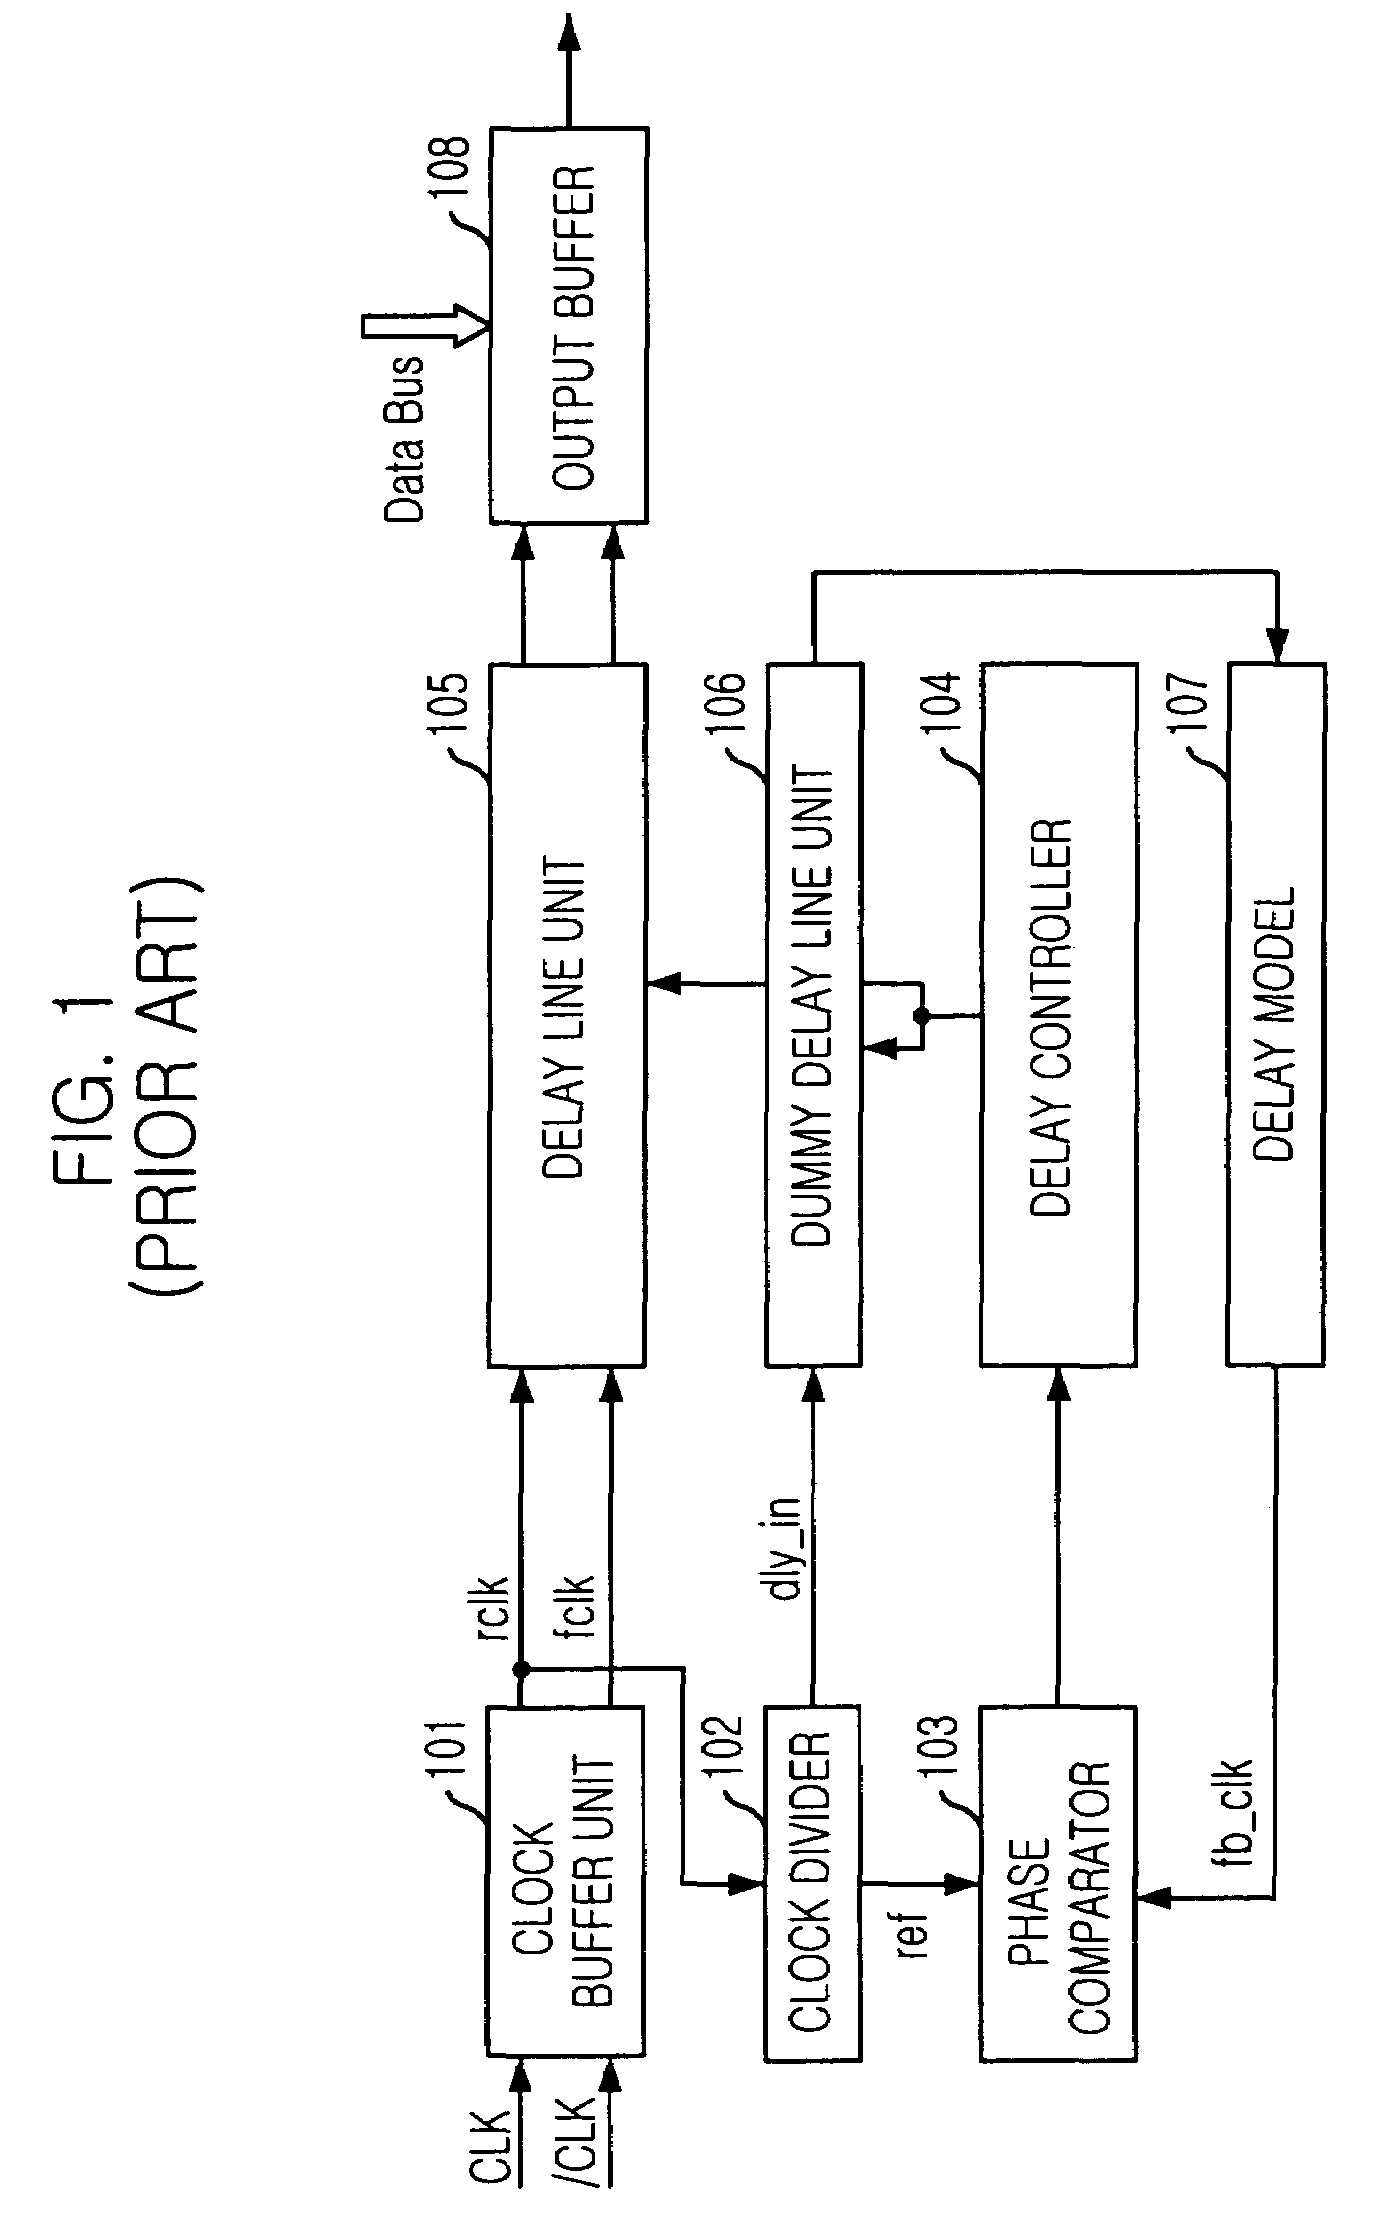 Delay locked loop in semiconductor memory device and its clock locking method